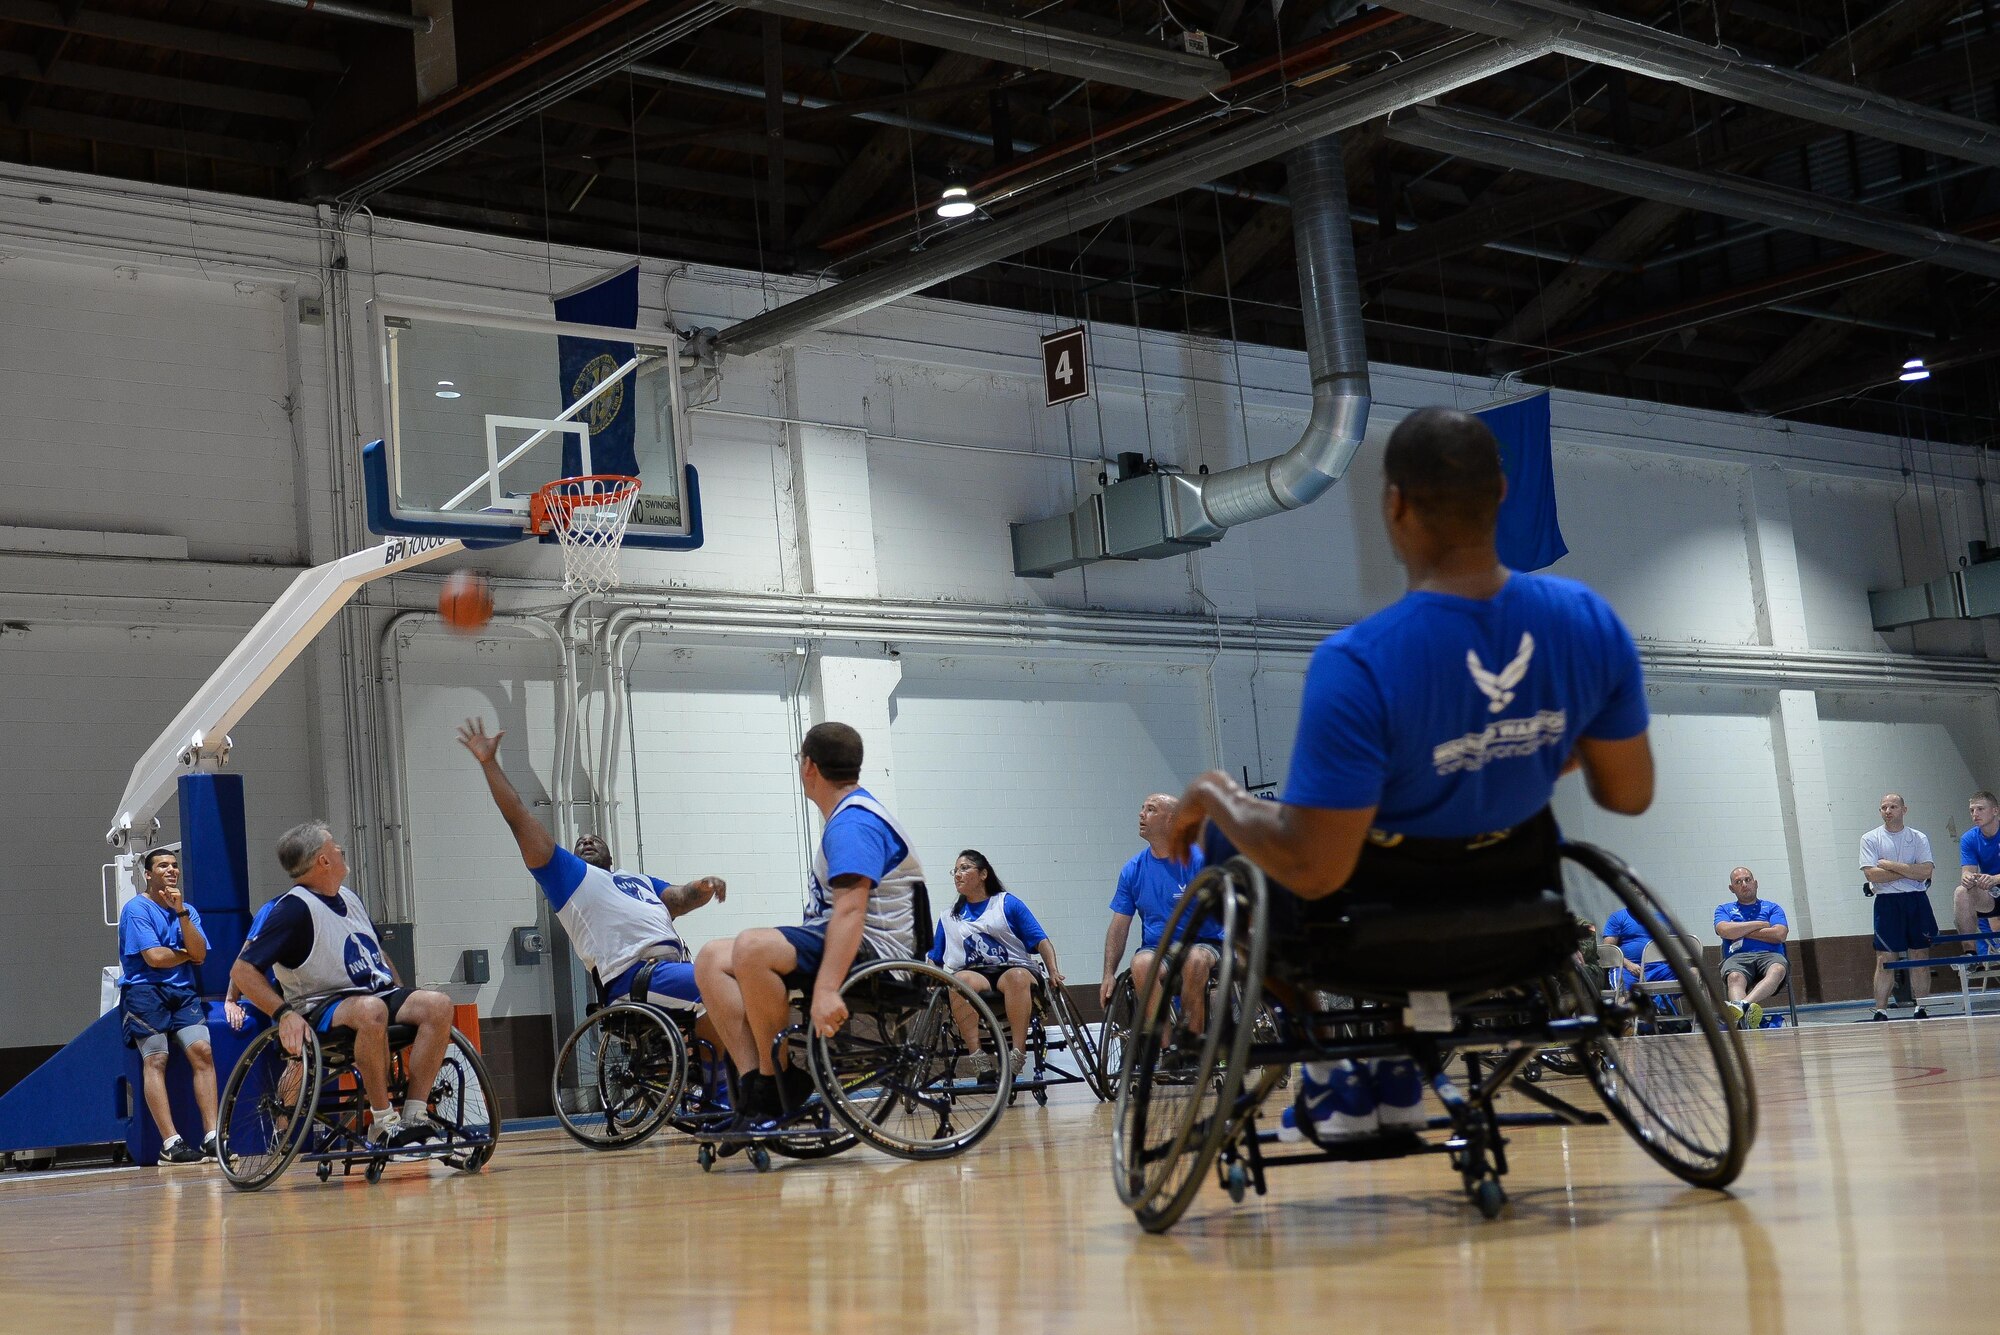 Wounded Warrior Nate Bias tries to intercept a ball during seated basketball in the Offutt Field House at Offutt Air Force Base, Neb., Sept. 21, 2016 during Air Force wounded warrior training. The Wounded Warrior event had 120 current and former Air Force members from across the country participate in sports. (U.S. Air Force photo by Zachary Hada)